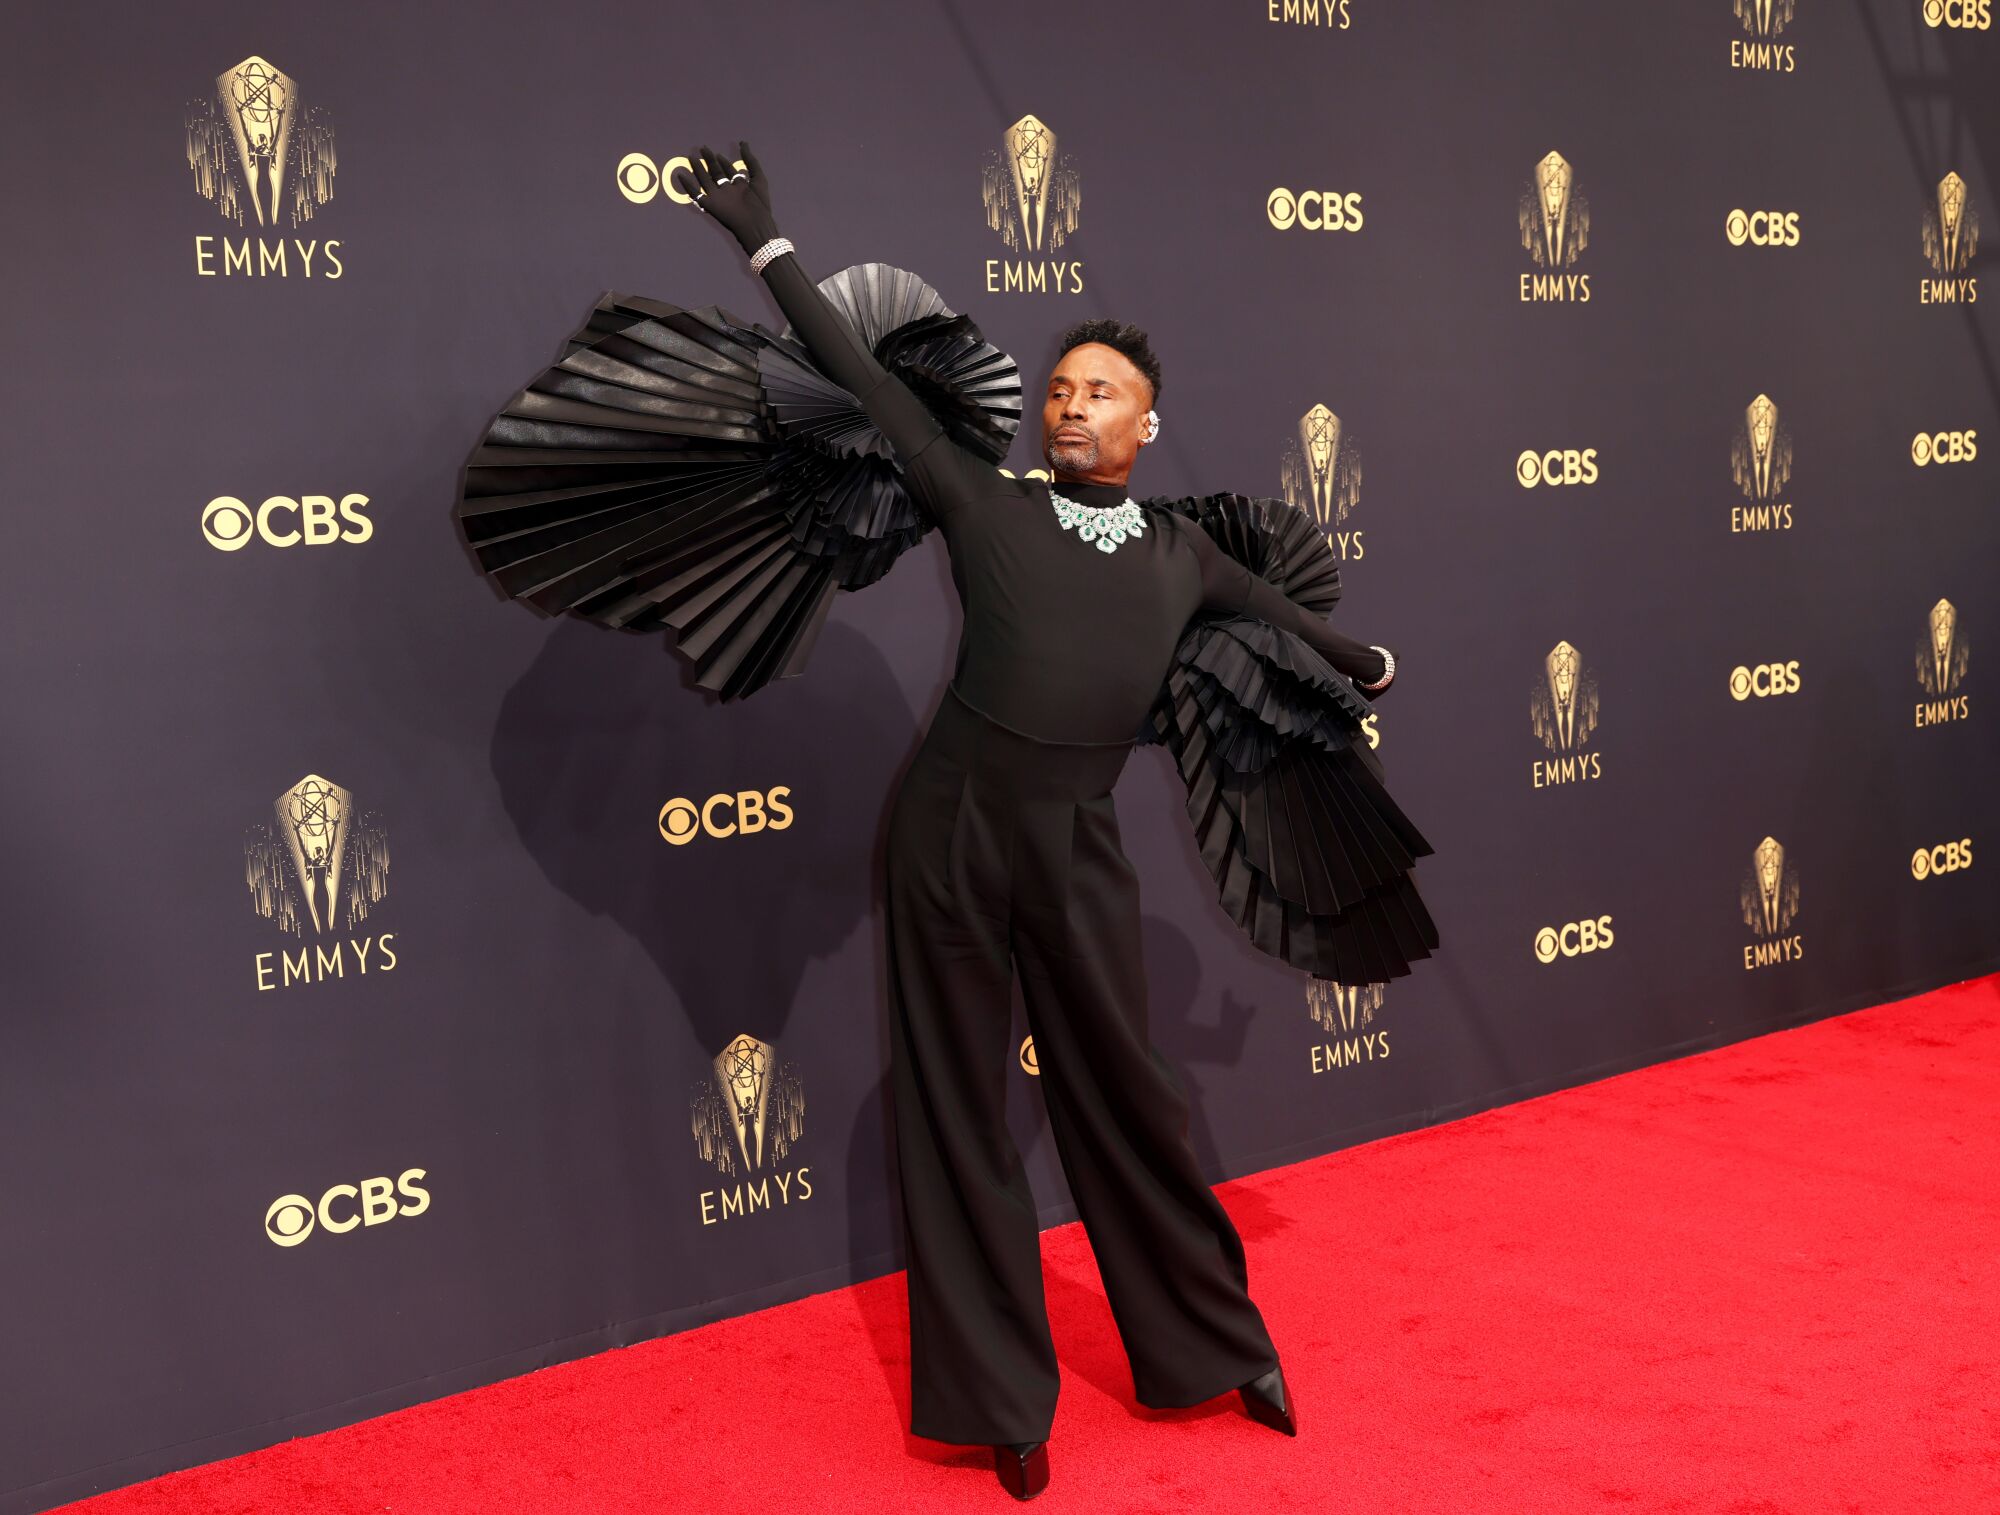 Billy Porter raises an arm on the red carpet.